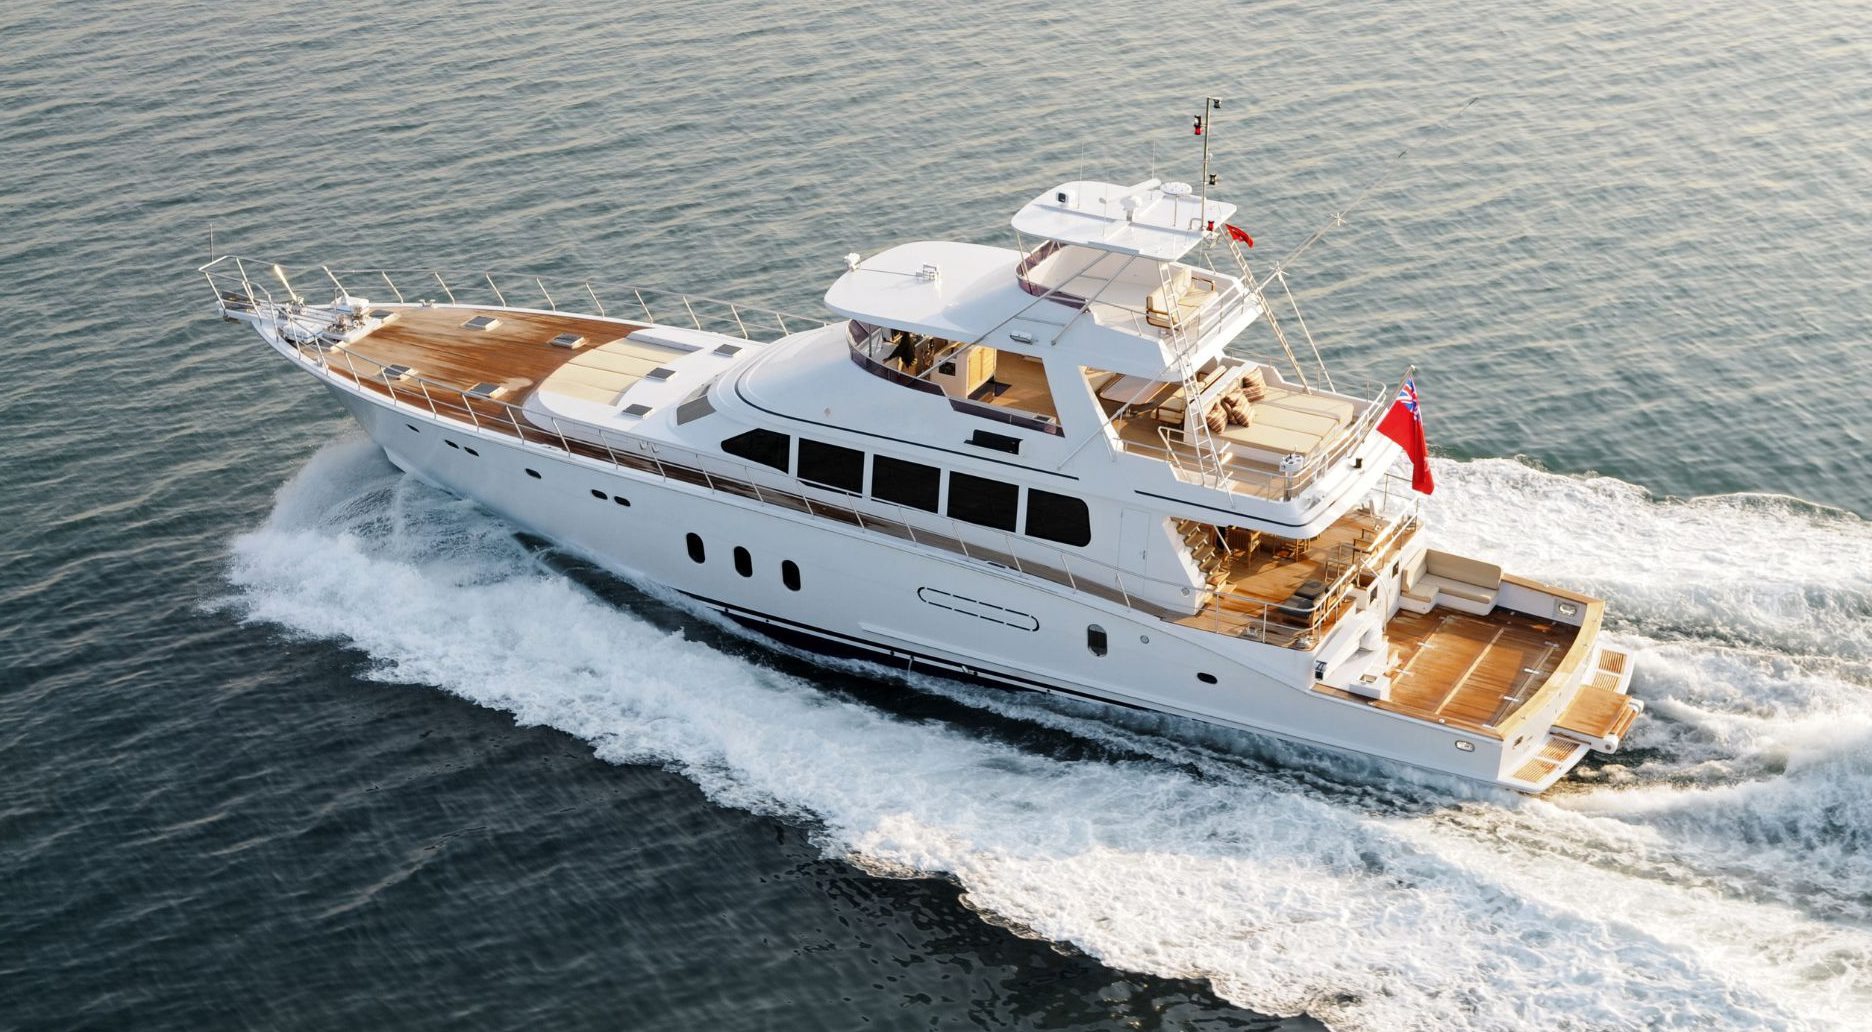 Global Yacht Market Outlook, Opportunities And Strategies – Includes Yacht Market Size